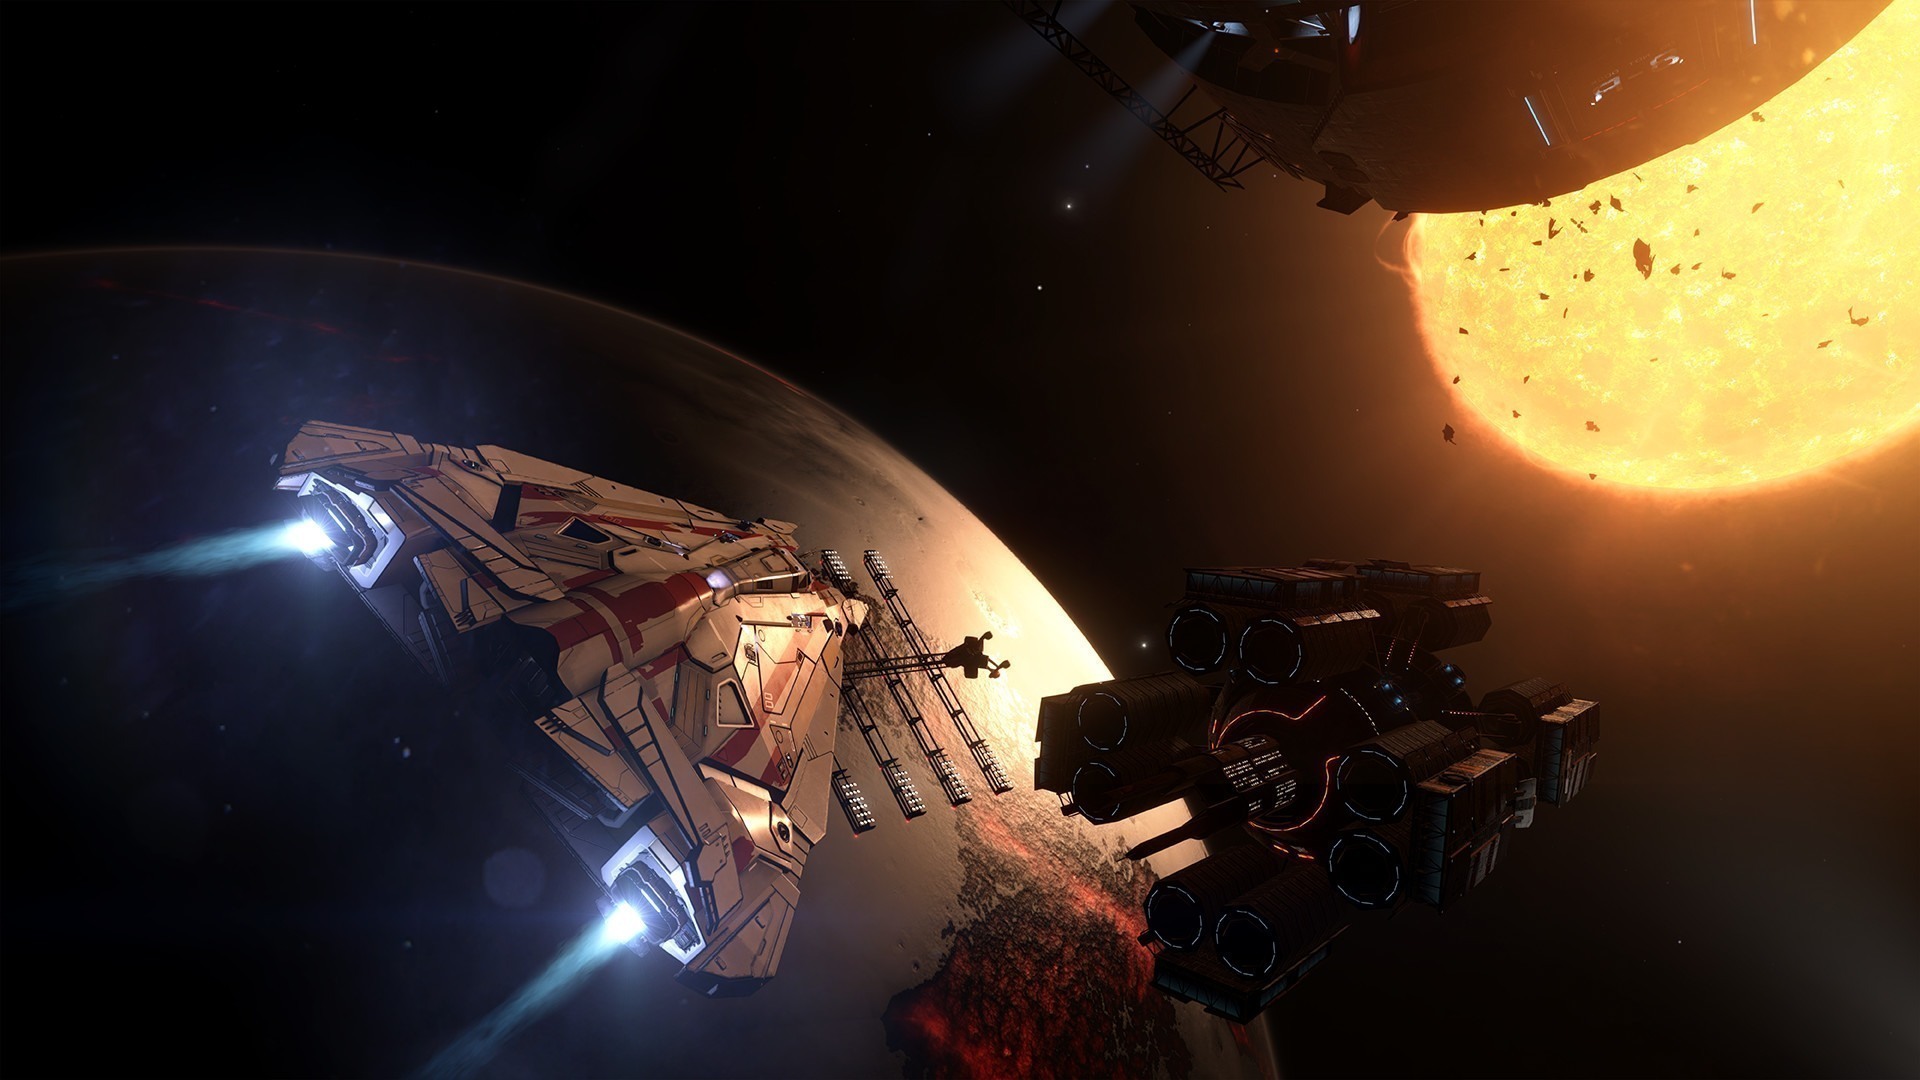 Elite Dangerous started with a massive, open galaxy to explore, and somehow it’s only managed to get bigger since it launched in 2014. Most updates have been major new features broken into seasons, the second of which was dubbed the Horizons expansion.  Simpler things like 4-player groups and a PvP arena mode were added for free closer to launch, along with the ability to align with NPC factions and a revamped mission system to take jobs that can affect your standing with them.   The Horizons update improved Elite more significantly, starting with the long awaited addition of planetary landings. Horizons then expanded ship customization with unique loot and crafting mechanics, followed by adding smaller fighter ships that could be deployed from larger one. Most recently, Horizons finally gave every player a customizable avatar to create and introduced multicrew ships.  Throughout Horizons, hints and glimpses of Aliens have also been seen in Elite, and the Thargoid alien race is o